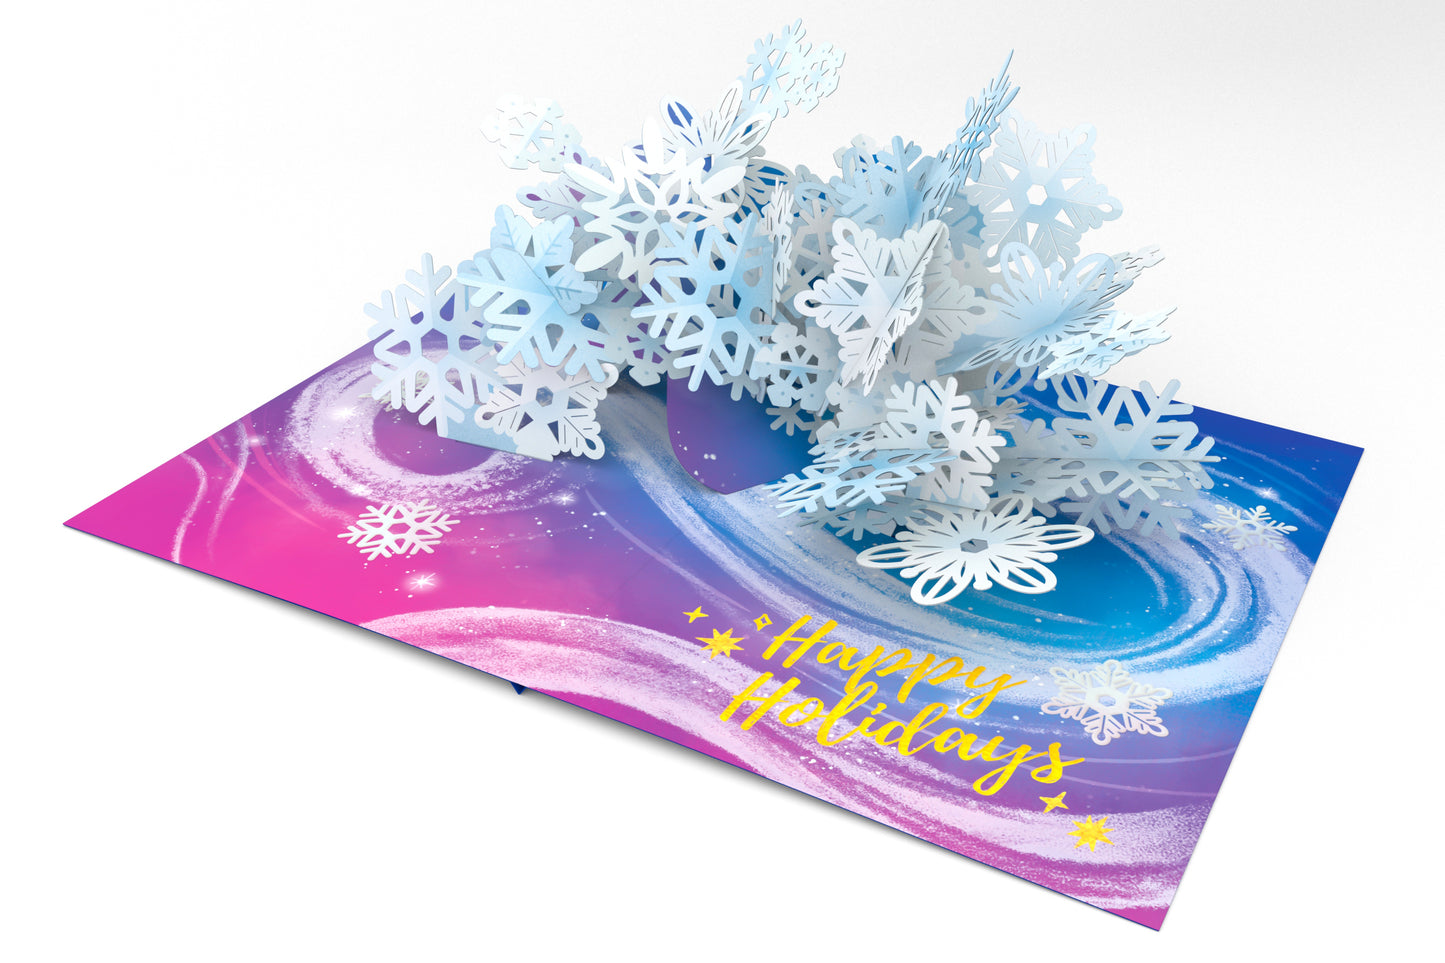 Magical Snowflakes Happy Holidays Pop-Up Card